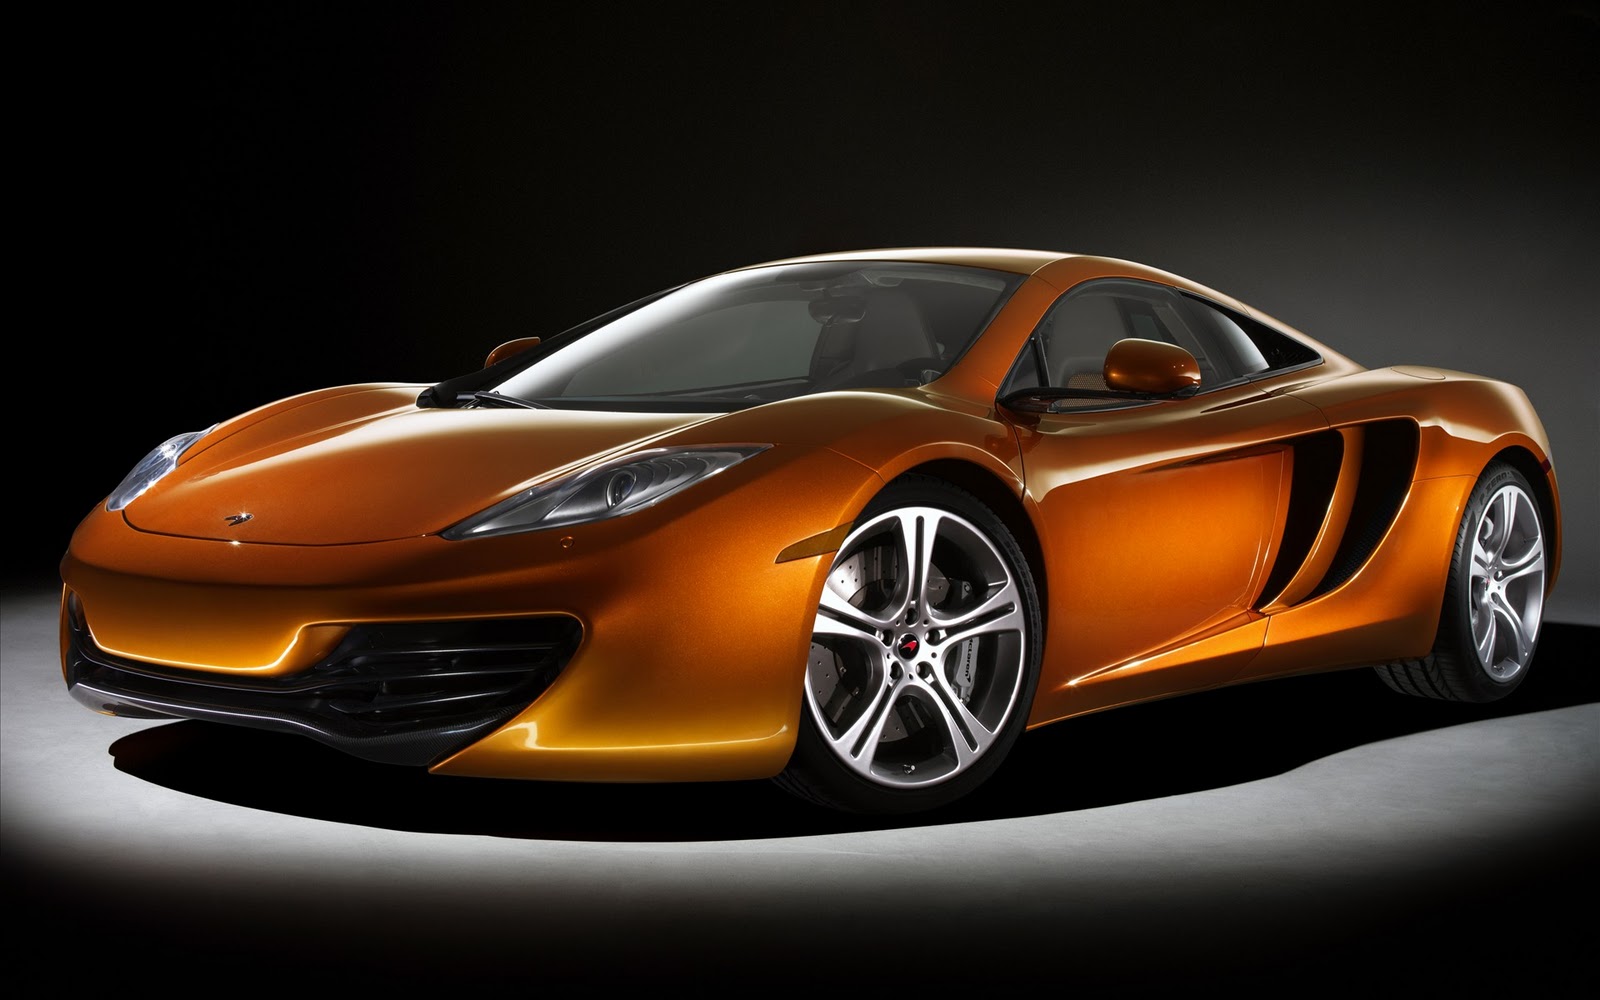 Cool cars wallpapers 2011 Cool Car Wallpapers 1600x1000